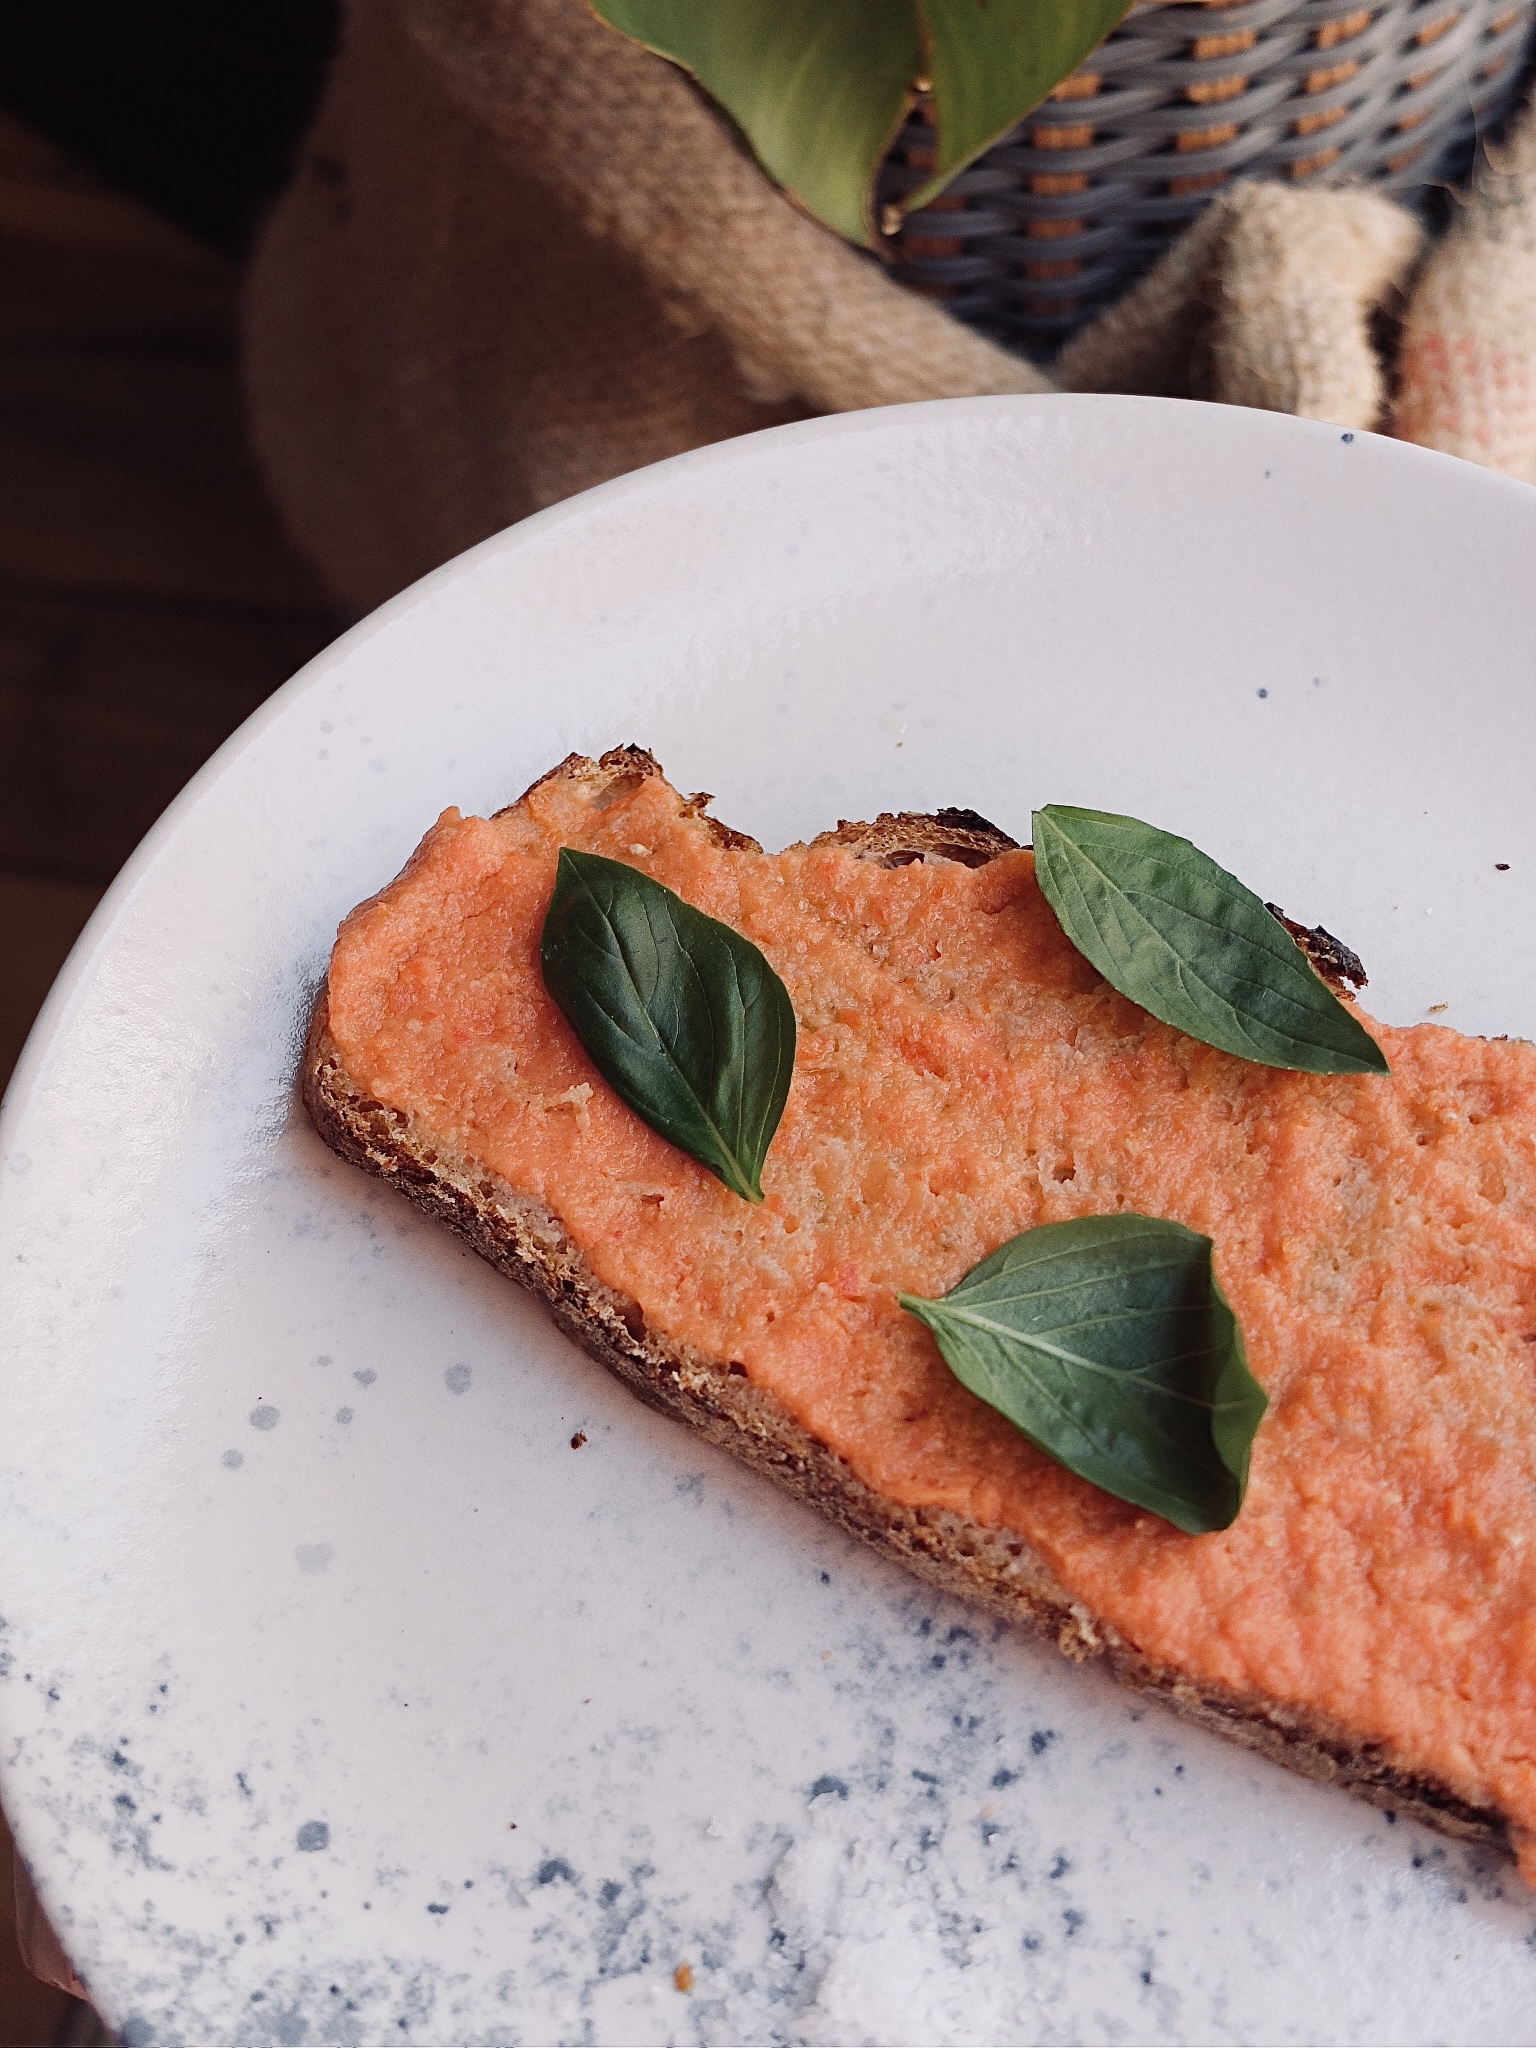 TOMATO AND BASIL TOAST (With sourdough seed bread)